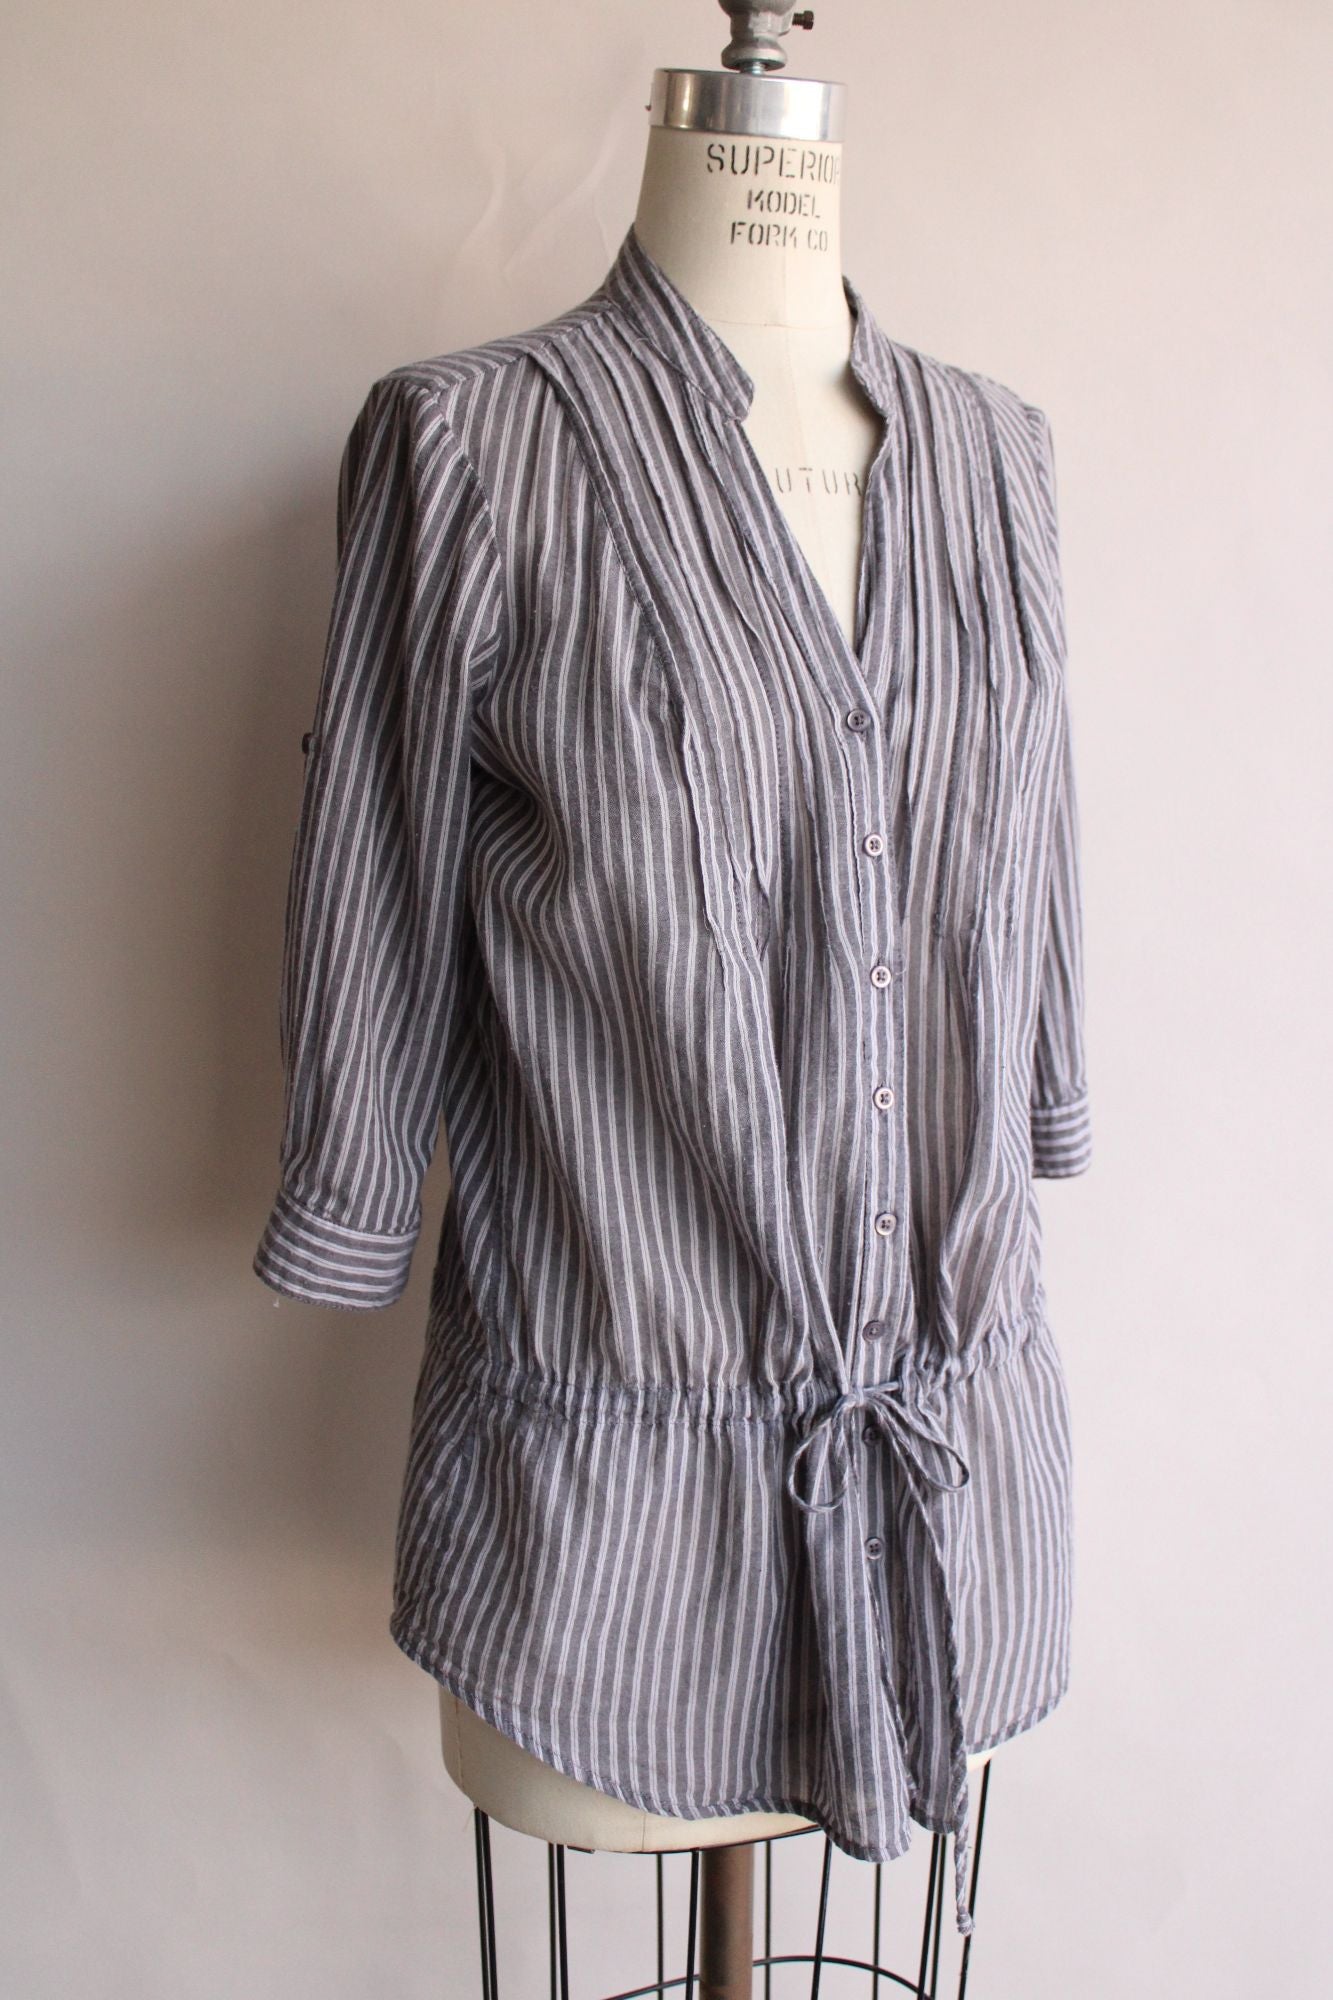 Mossimo Ladies Blouse, Size Large, Gray Pinstripe, Cuffed Sleeve, Cotton